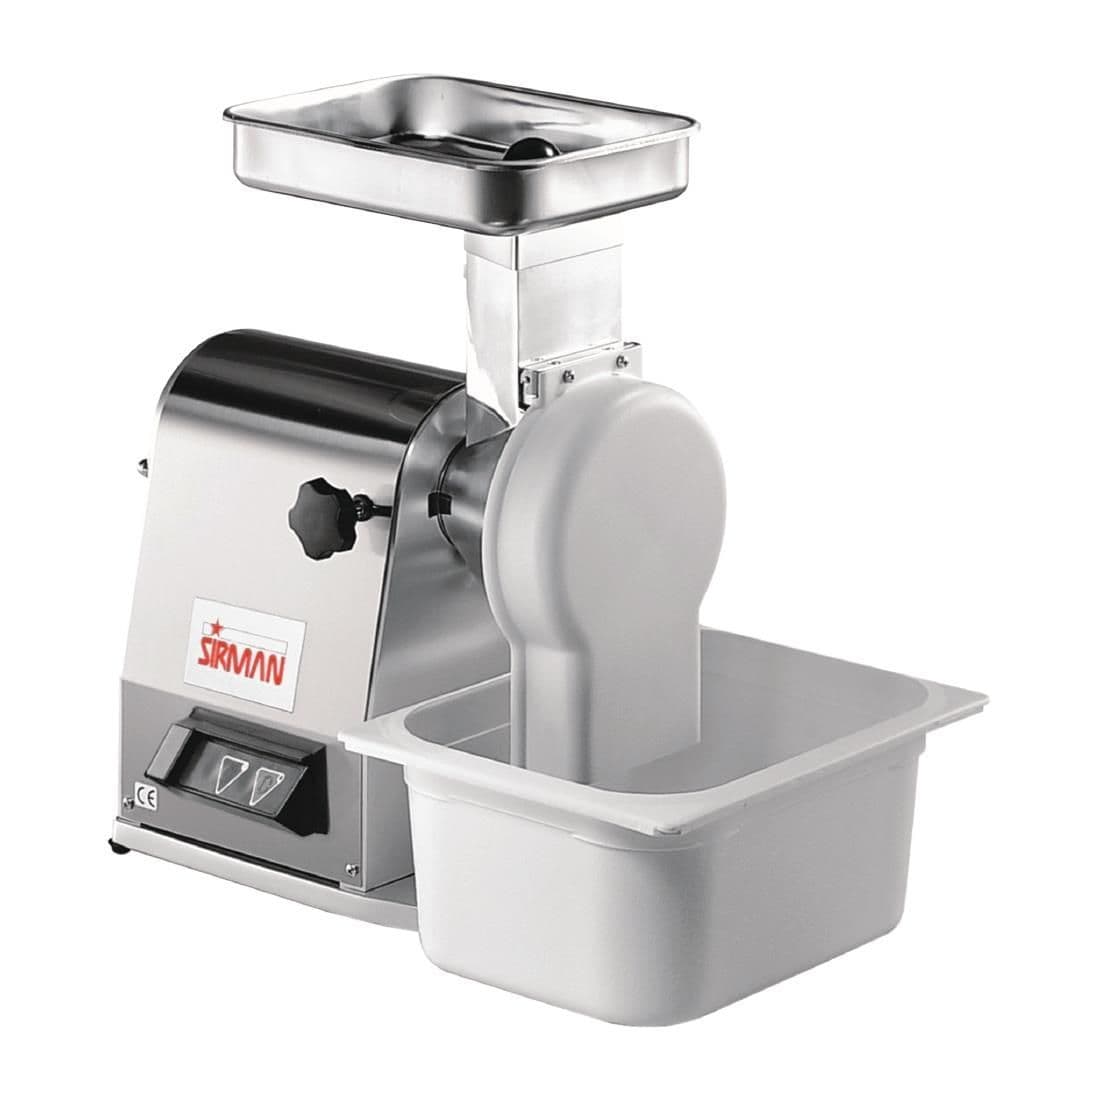 CT199 Sirman Athos Soft Cheese Grater JD Catering Equipment Solutions Ltd